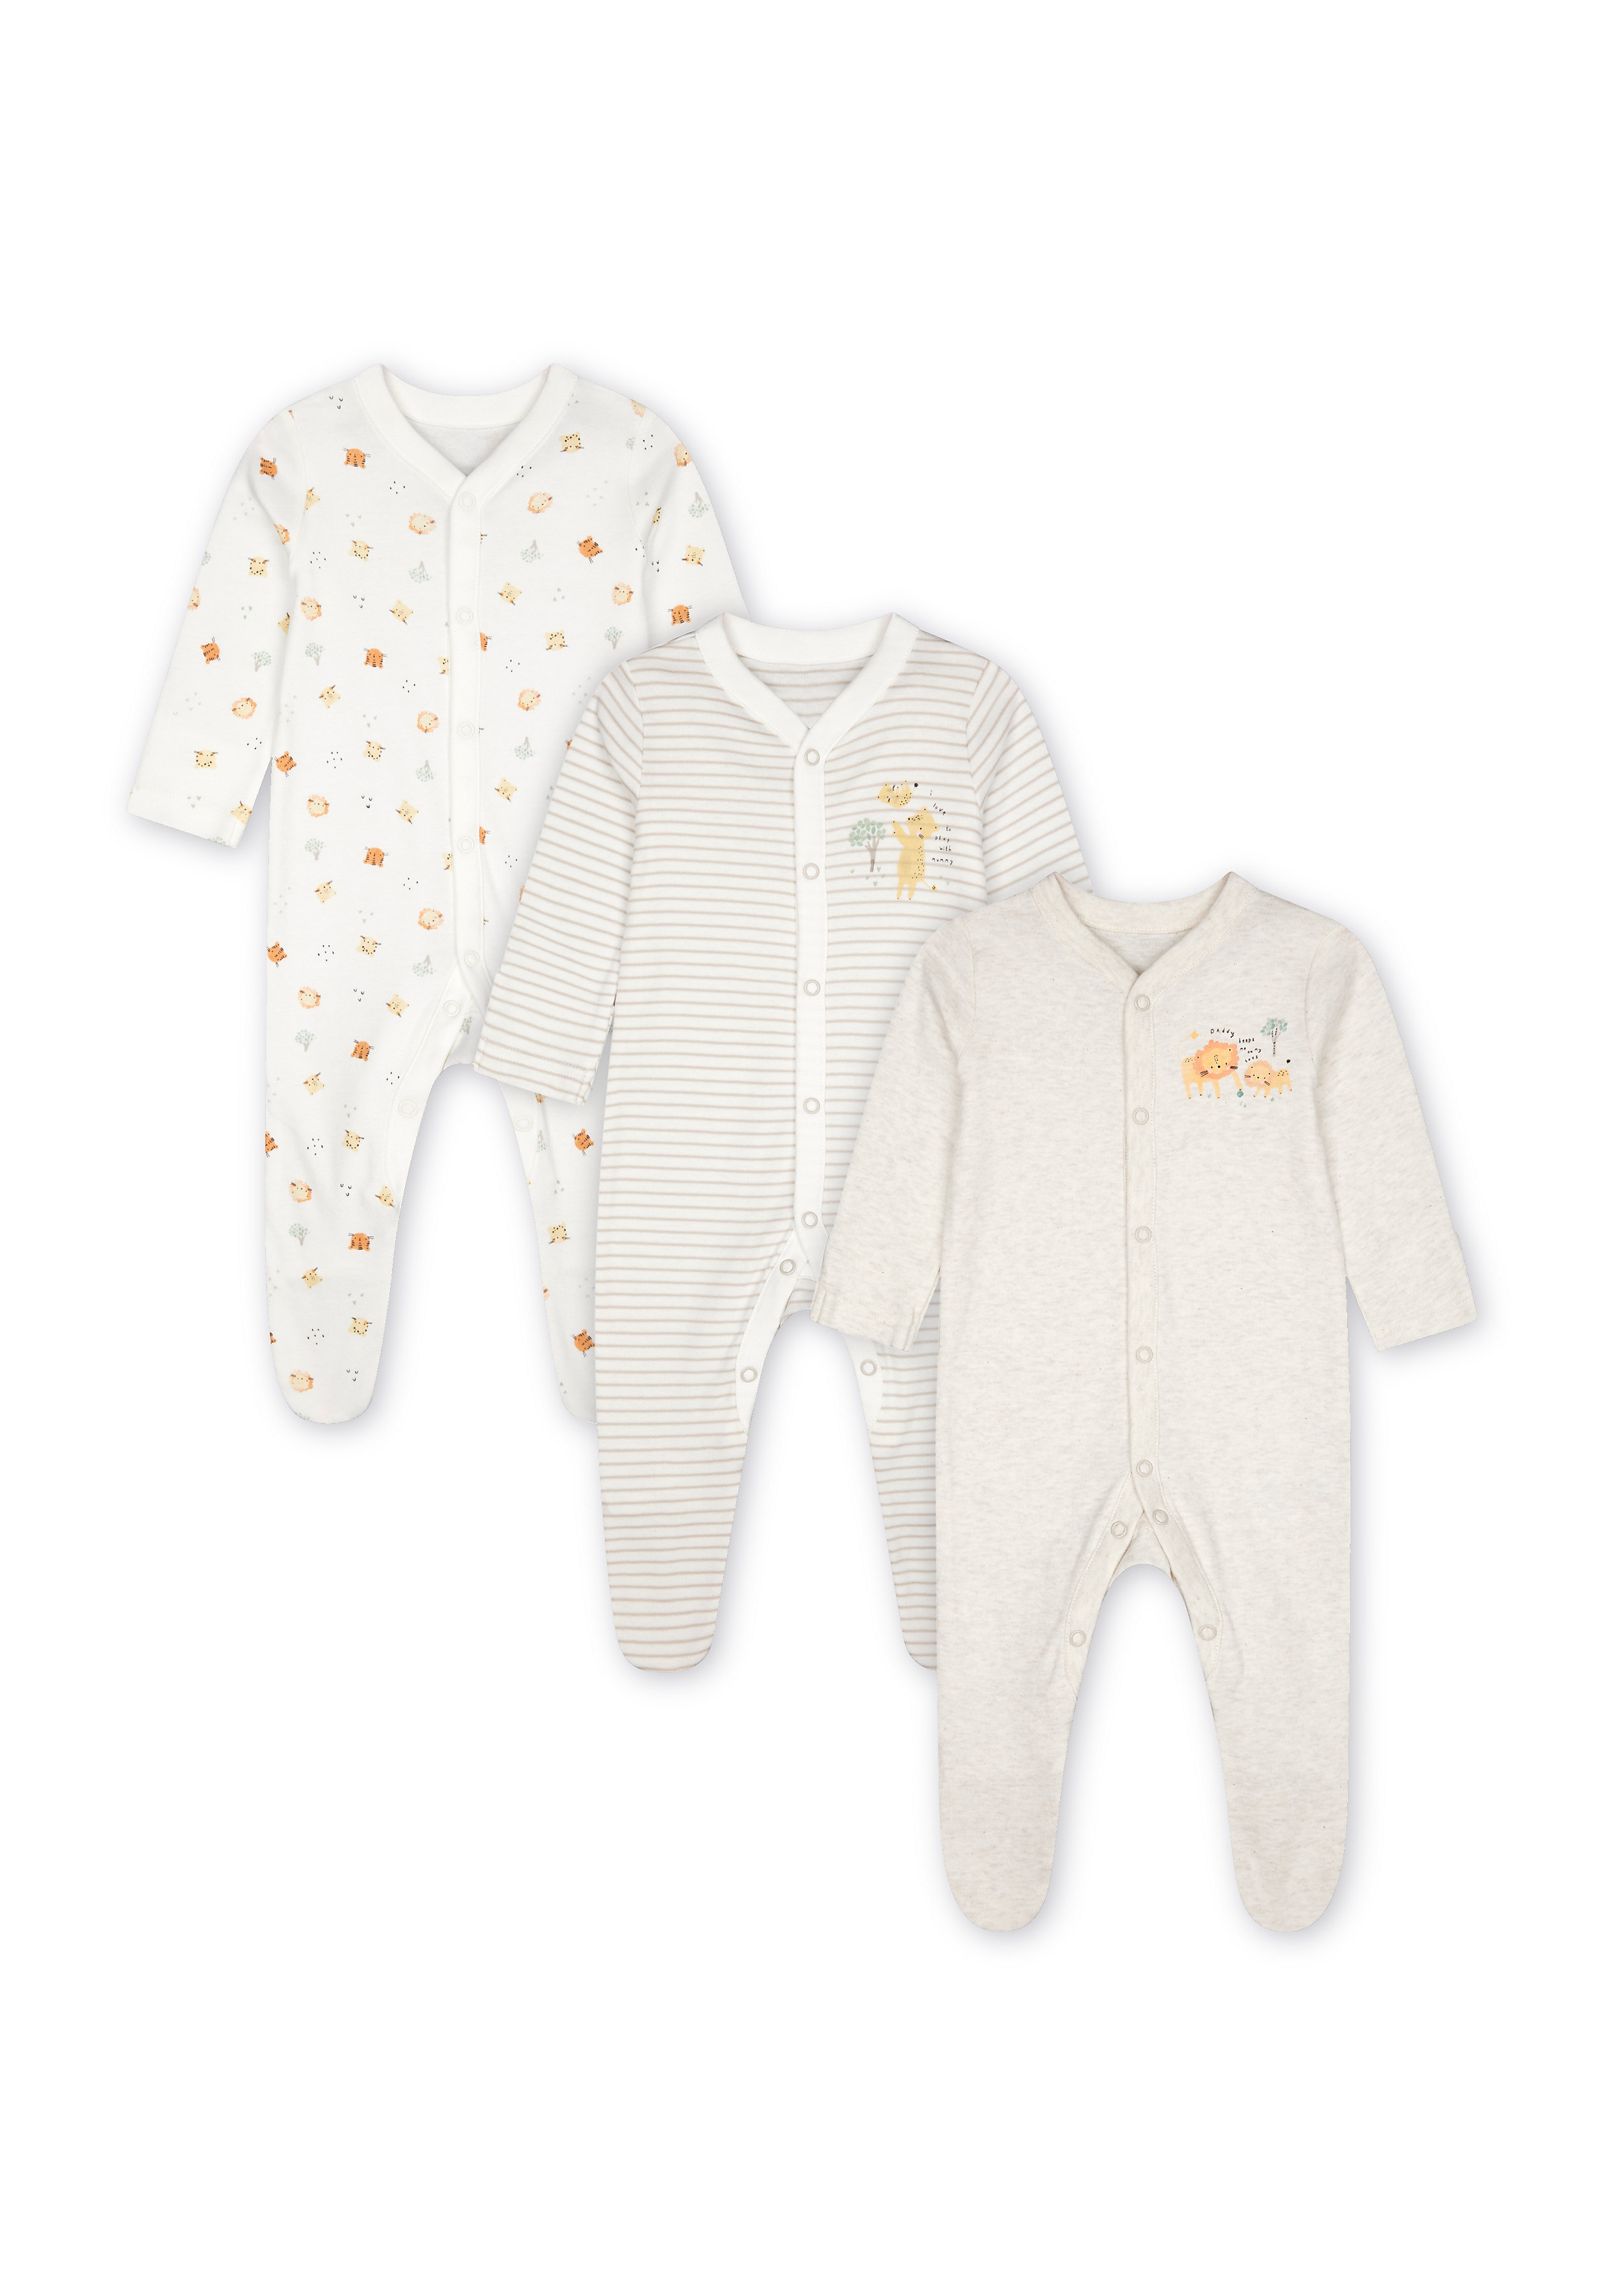 Mothercare | Unisex Sleepsuit Stripes And Animal Print  - Pack Of 3 - Cream